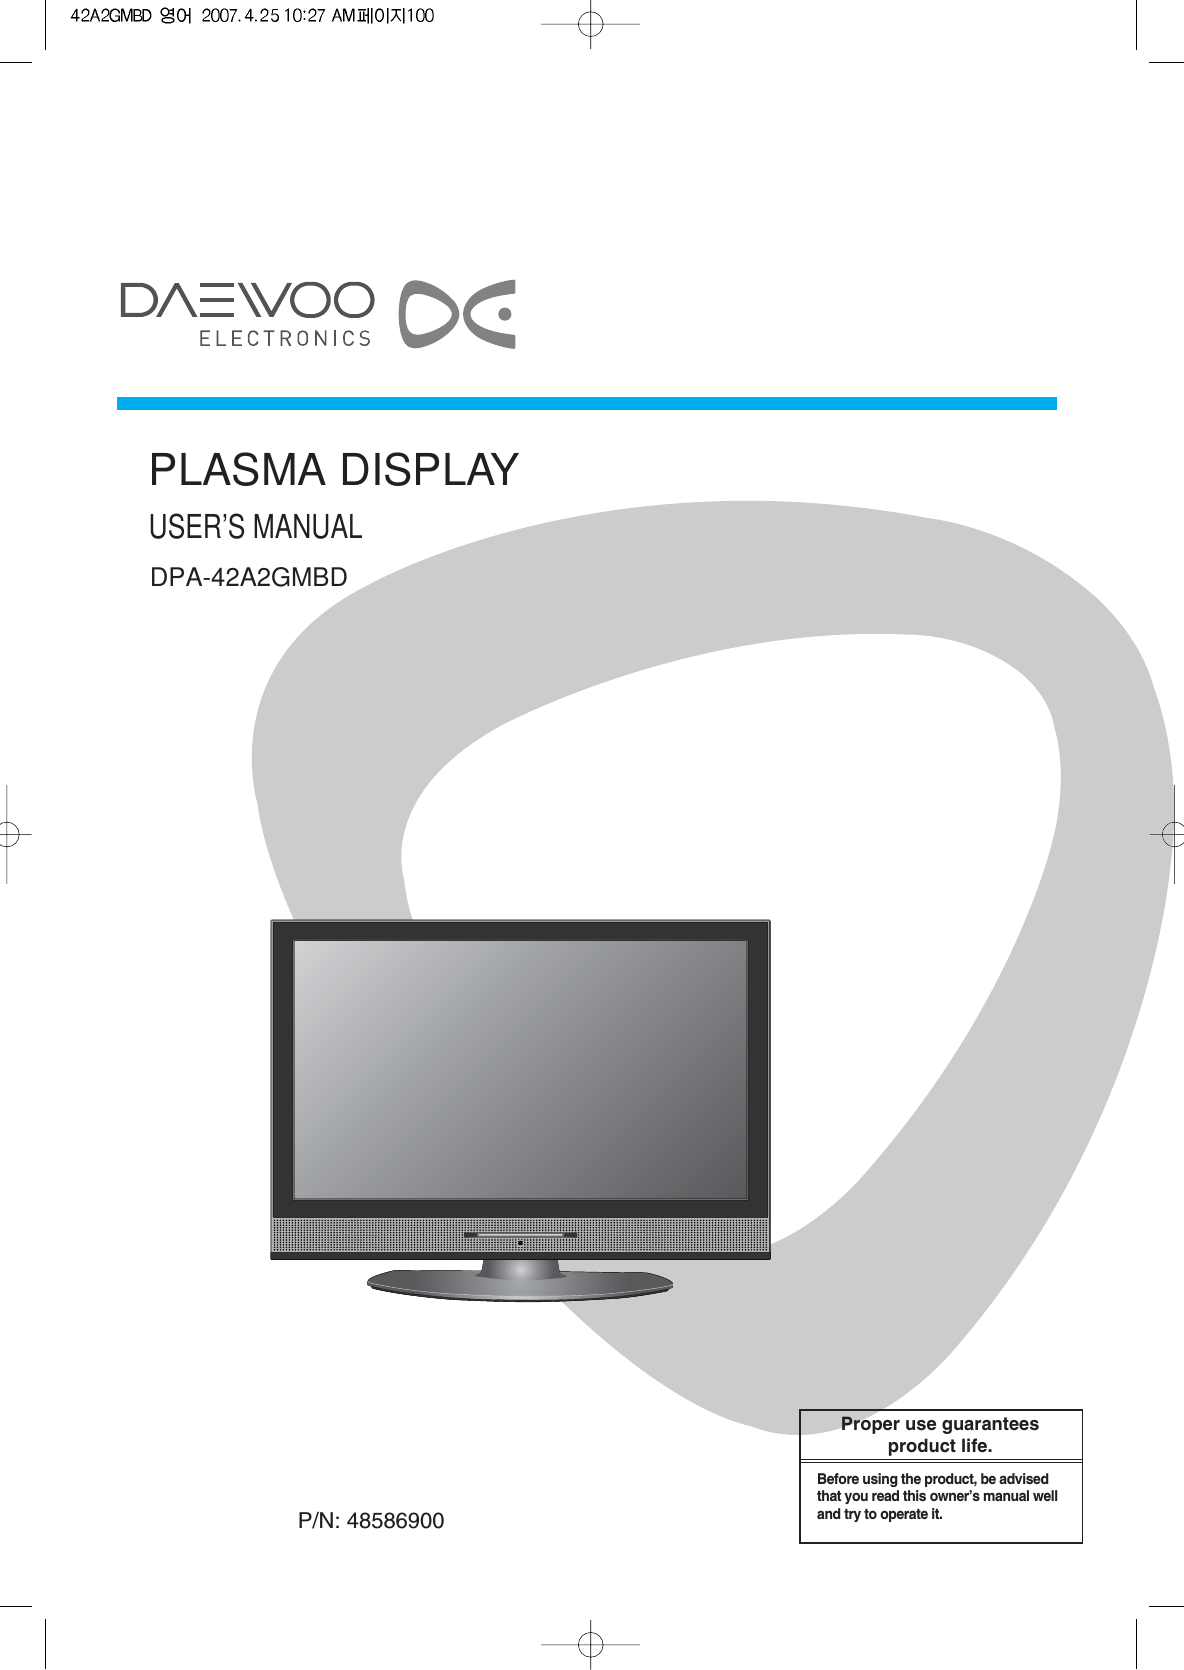 P/N: 48586900PLASMA DISPLAYUSER’S MANUALDPA-42A2GMBDProper use guaranteesproduct life.Before using the product, be advisedthat you read this owner’s manual welland try to operate it.